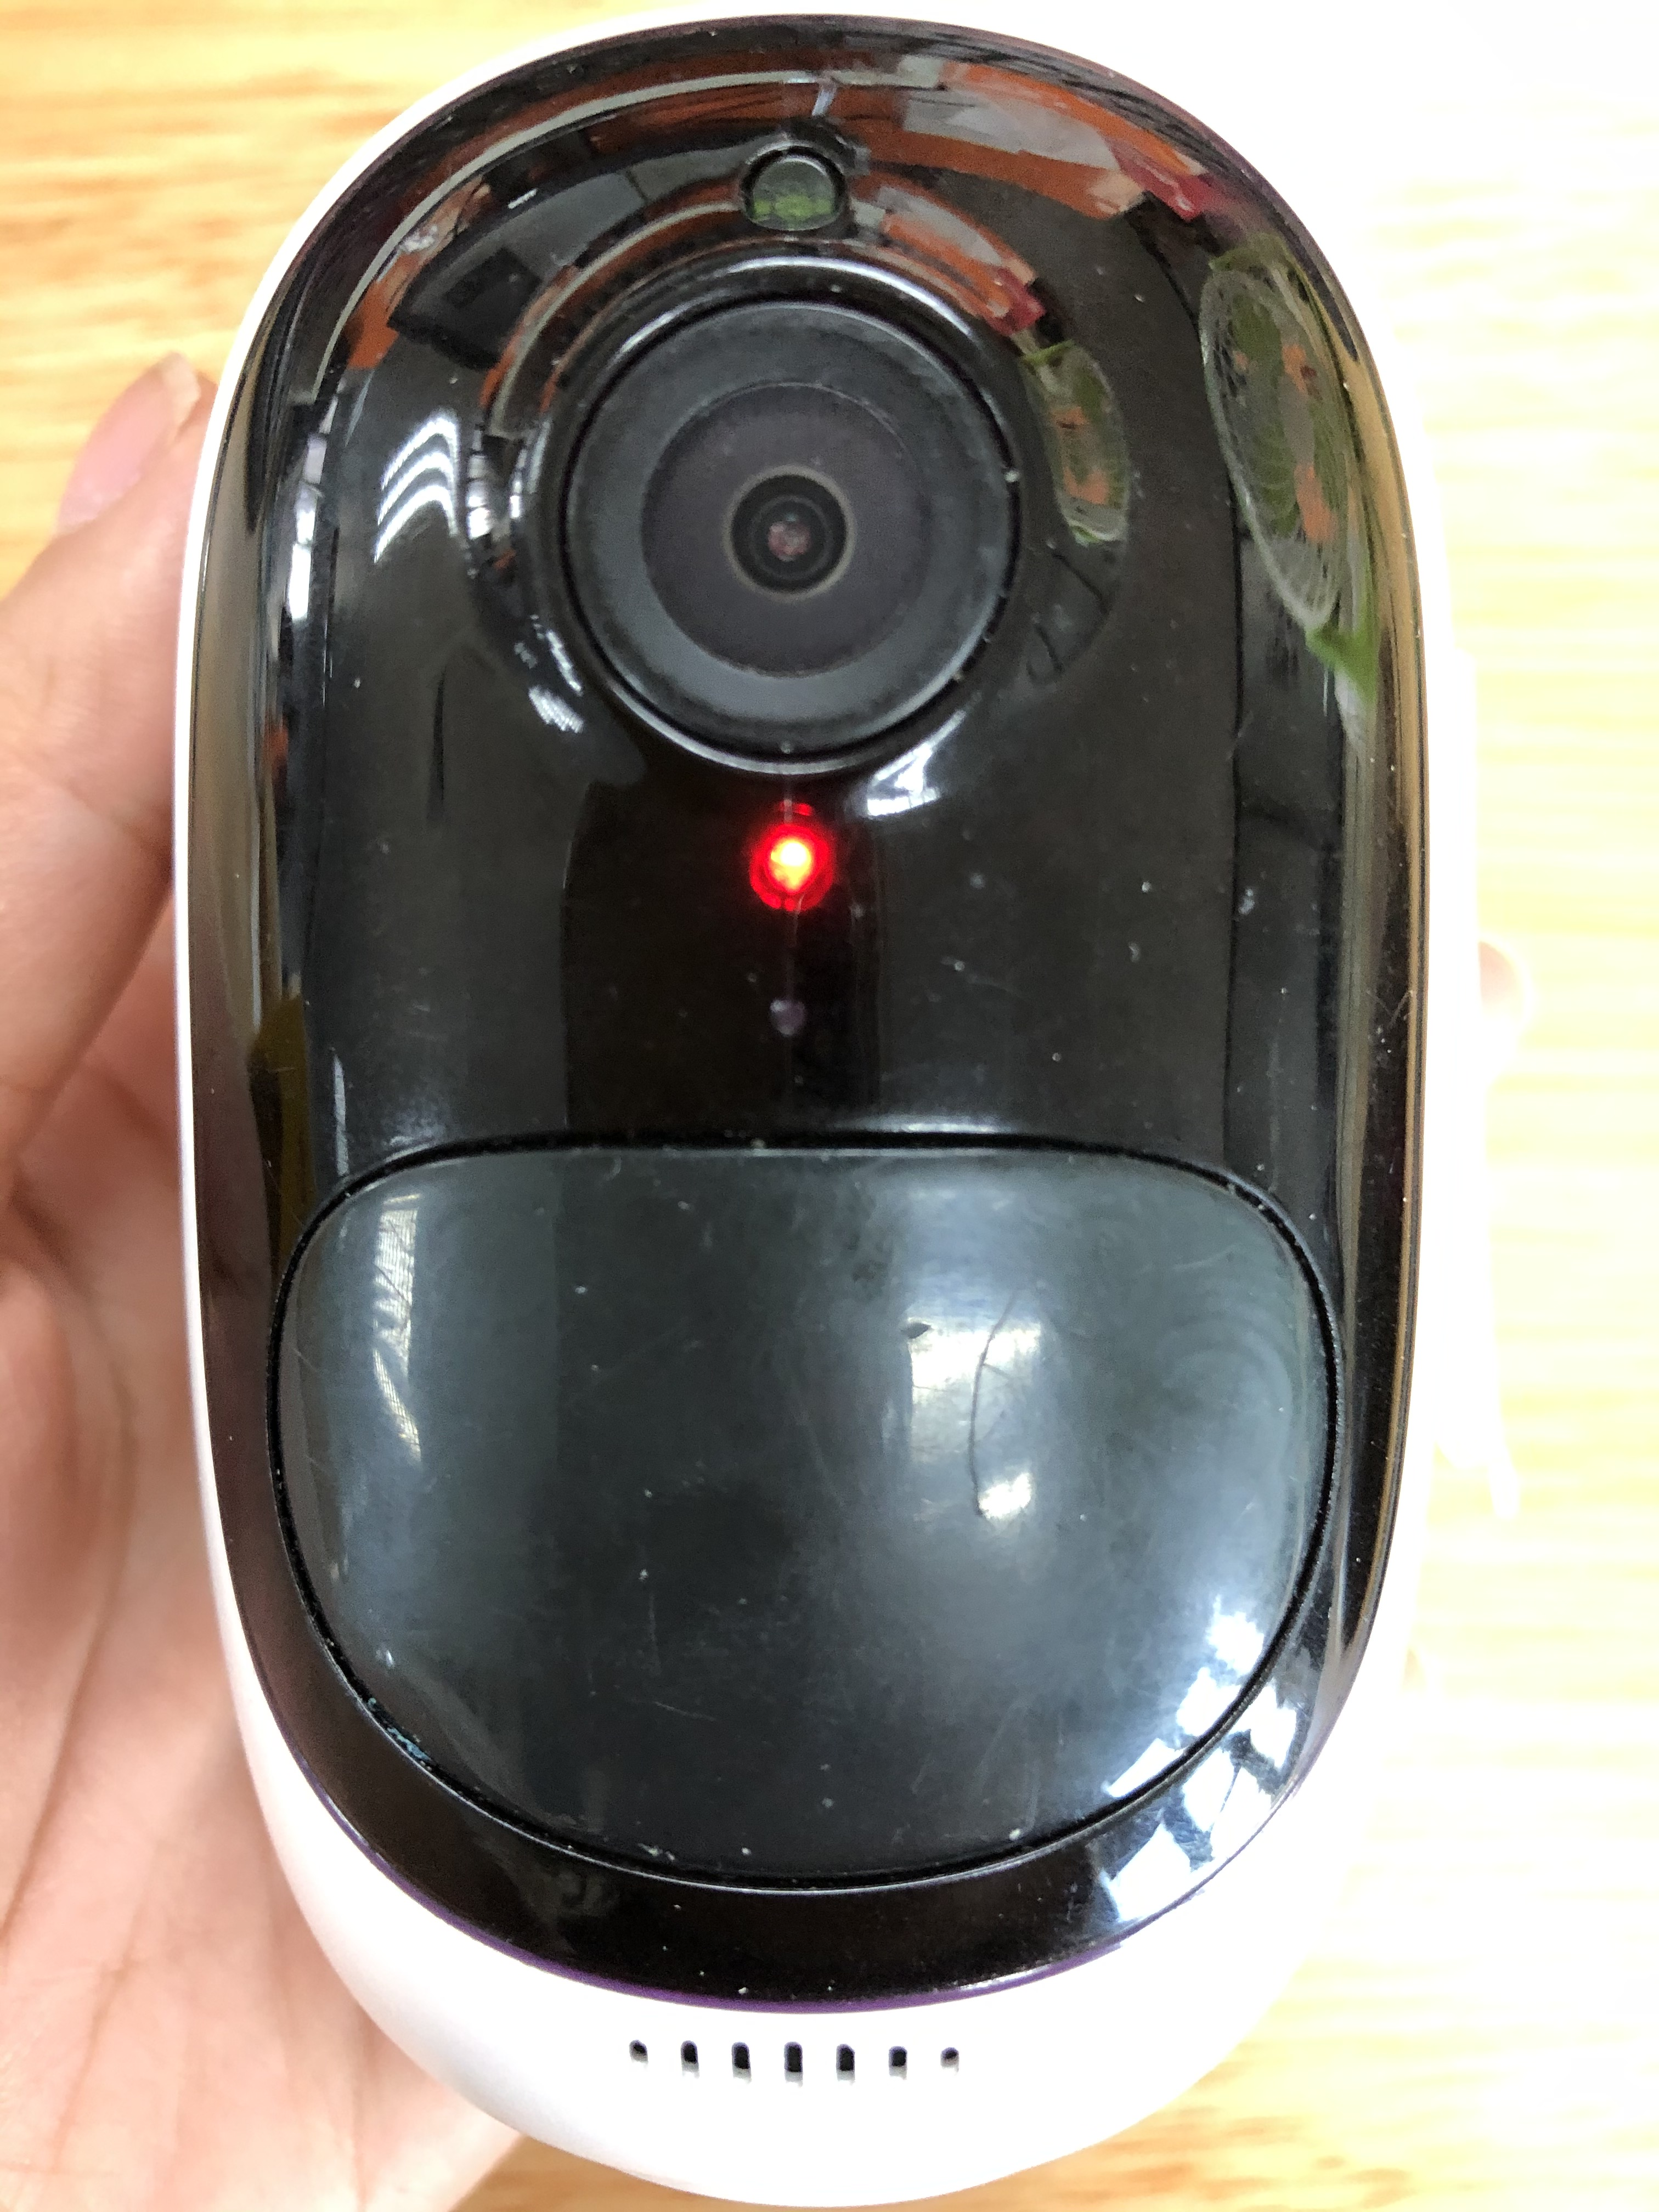 red status on battery-powered camera